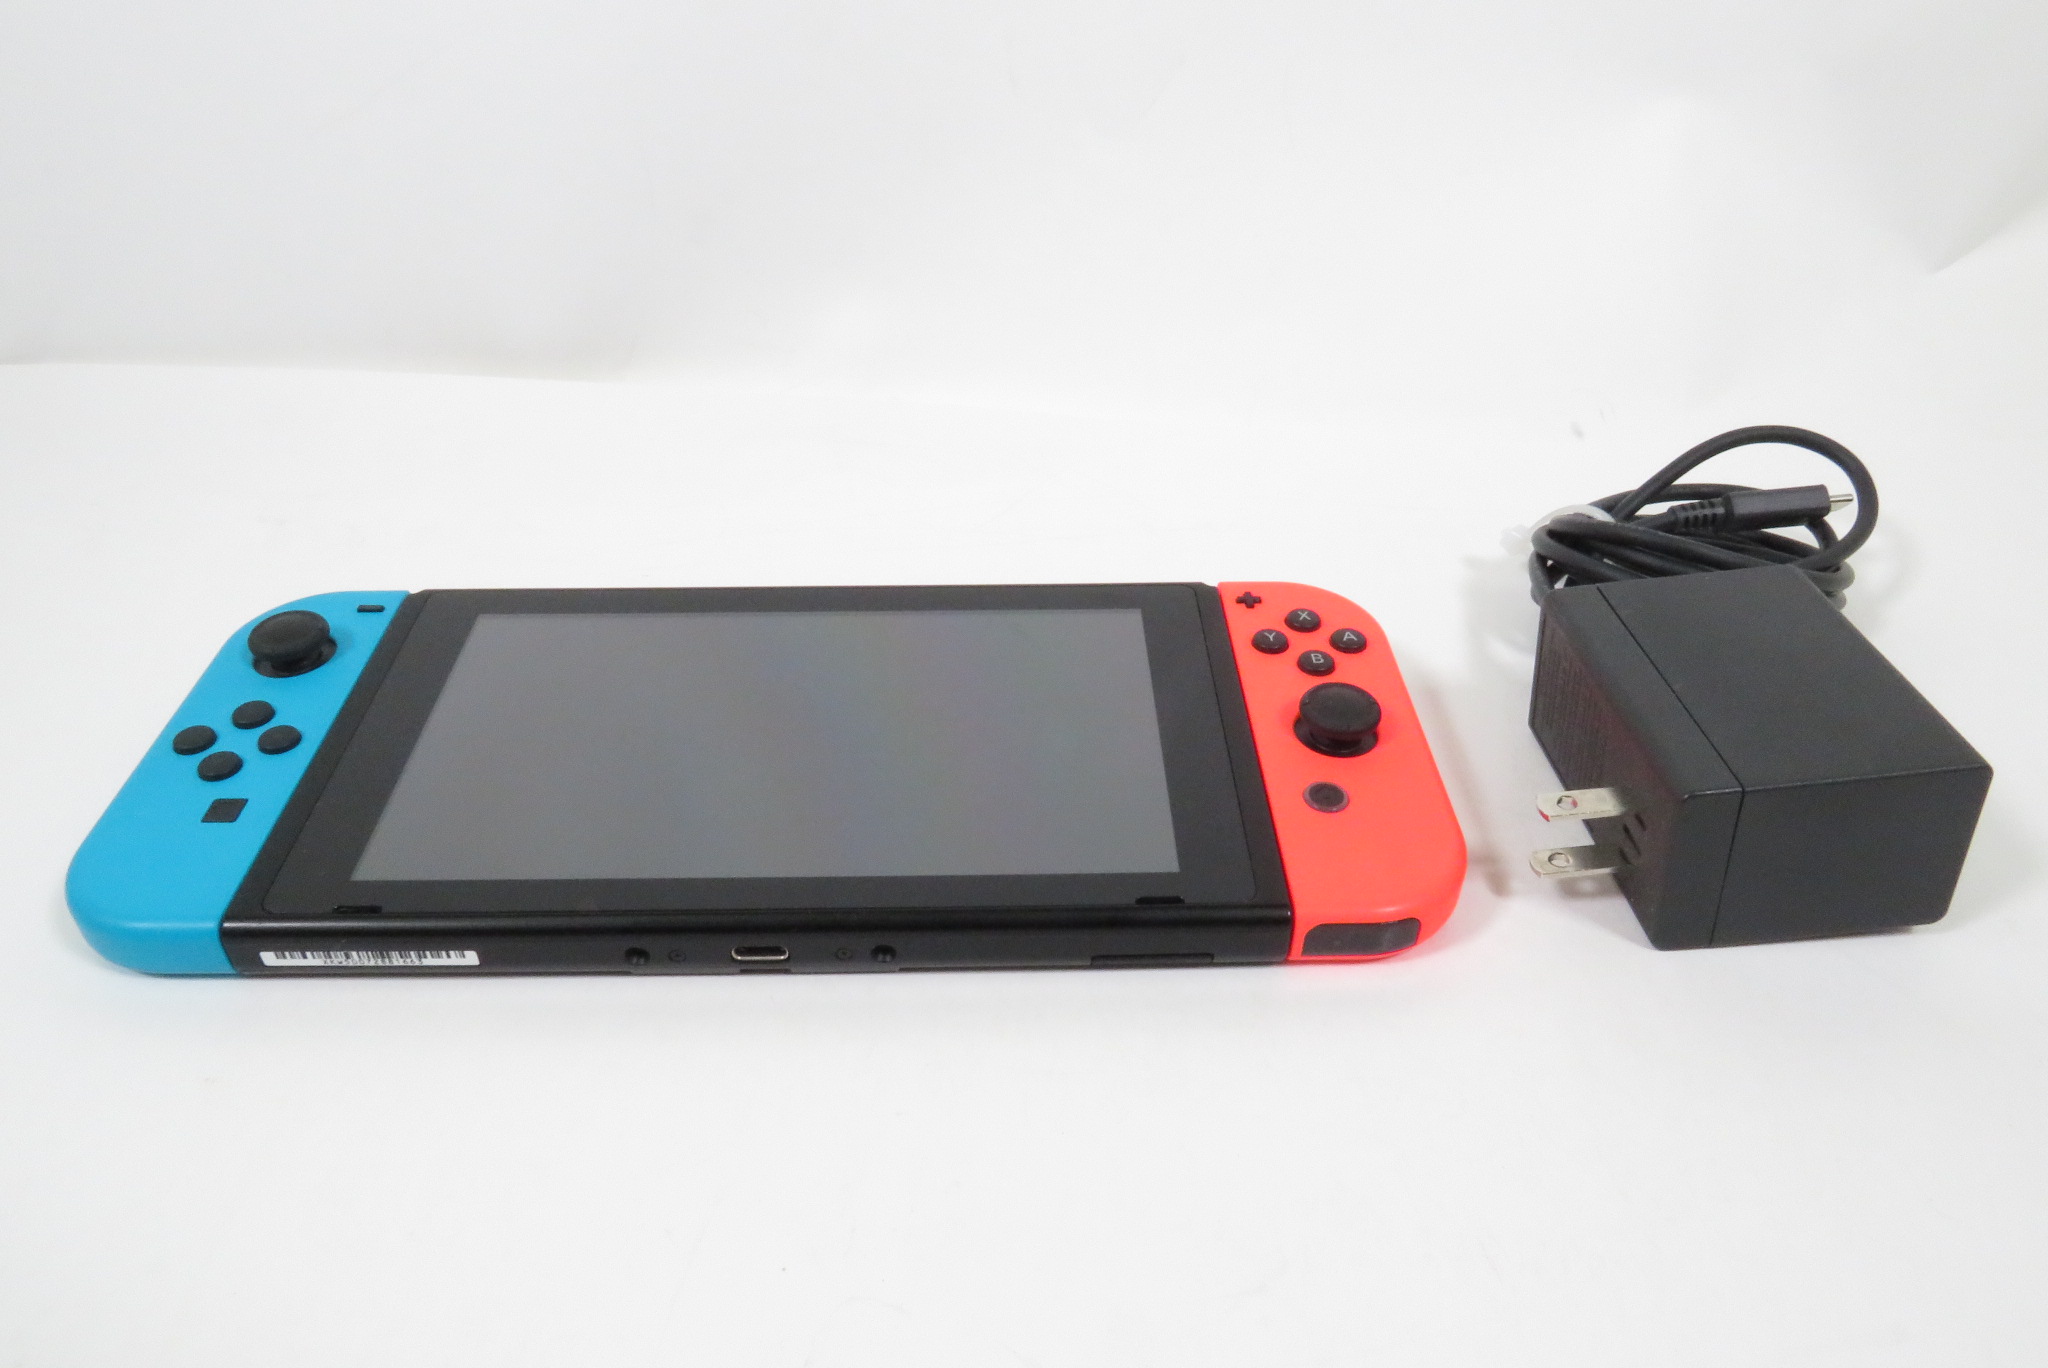 Nintendo Switch HAC-001(-01) Video Game System 6667